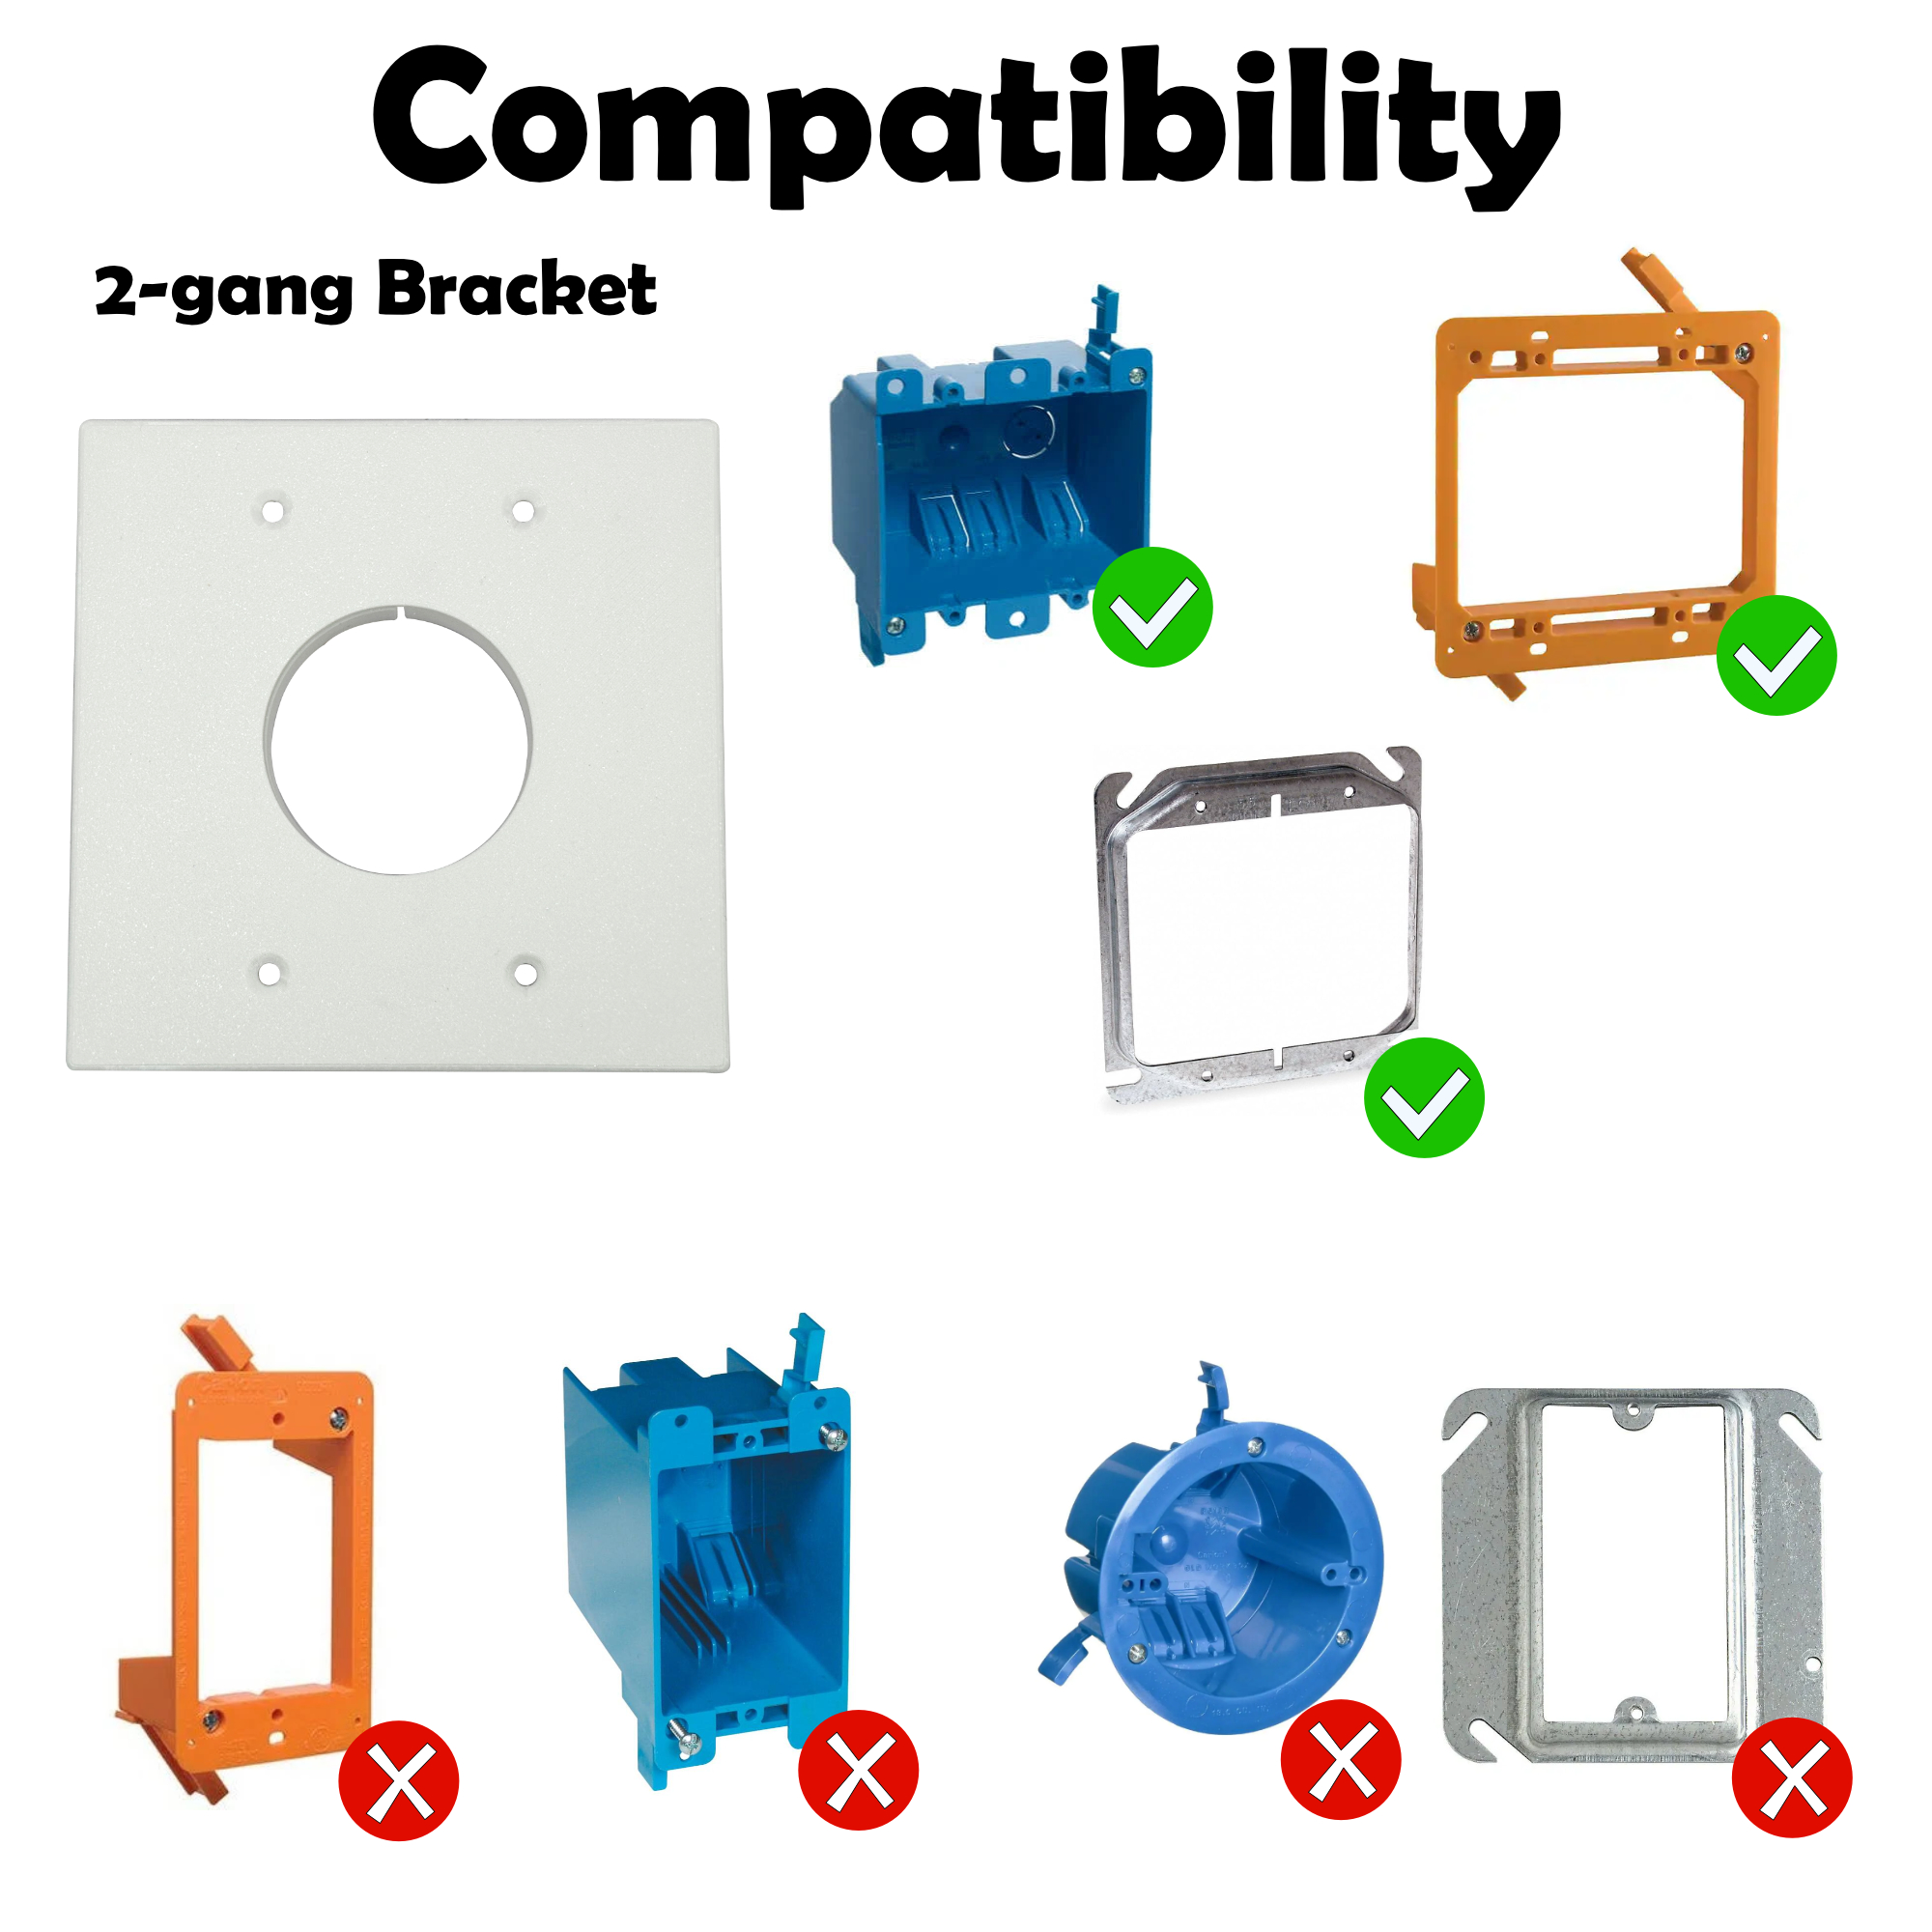 This bracket is compatible with 2-gang boxes, 2-gang mudrings, and 2-gang low voltage brackets. It is not compatible with 1-gang boxes, 1-gang low-voltage brackets, round boxes, or 1-gang metal mud rings